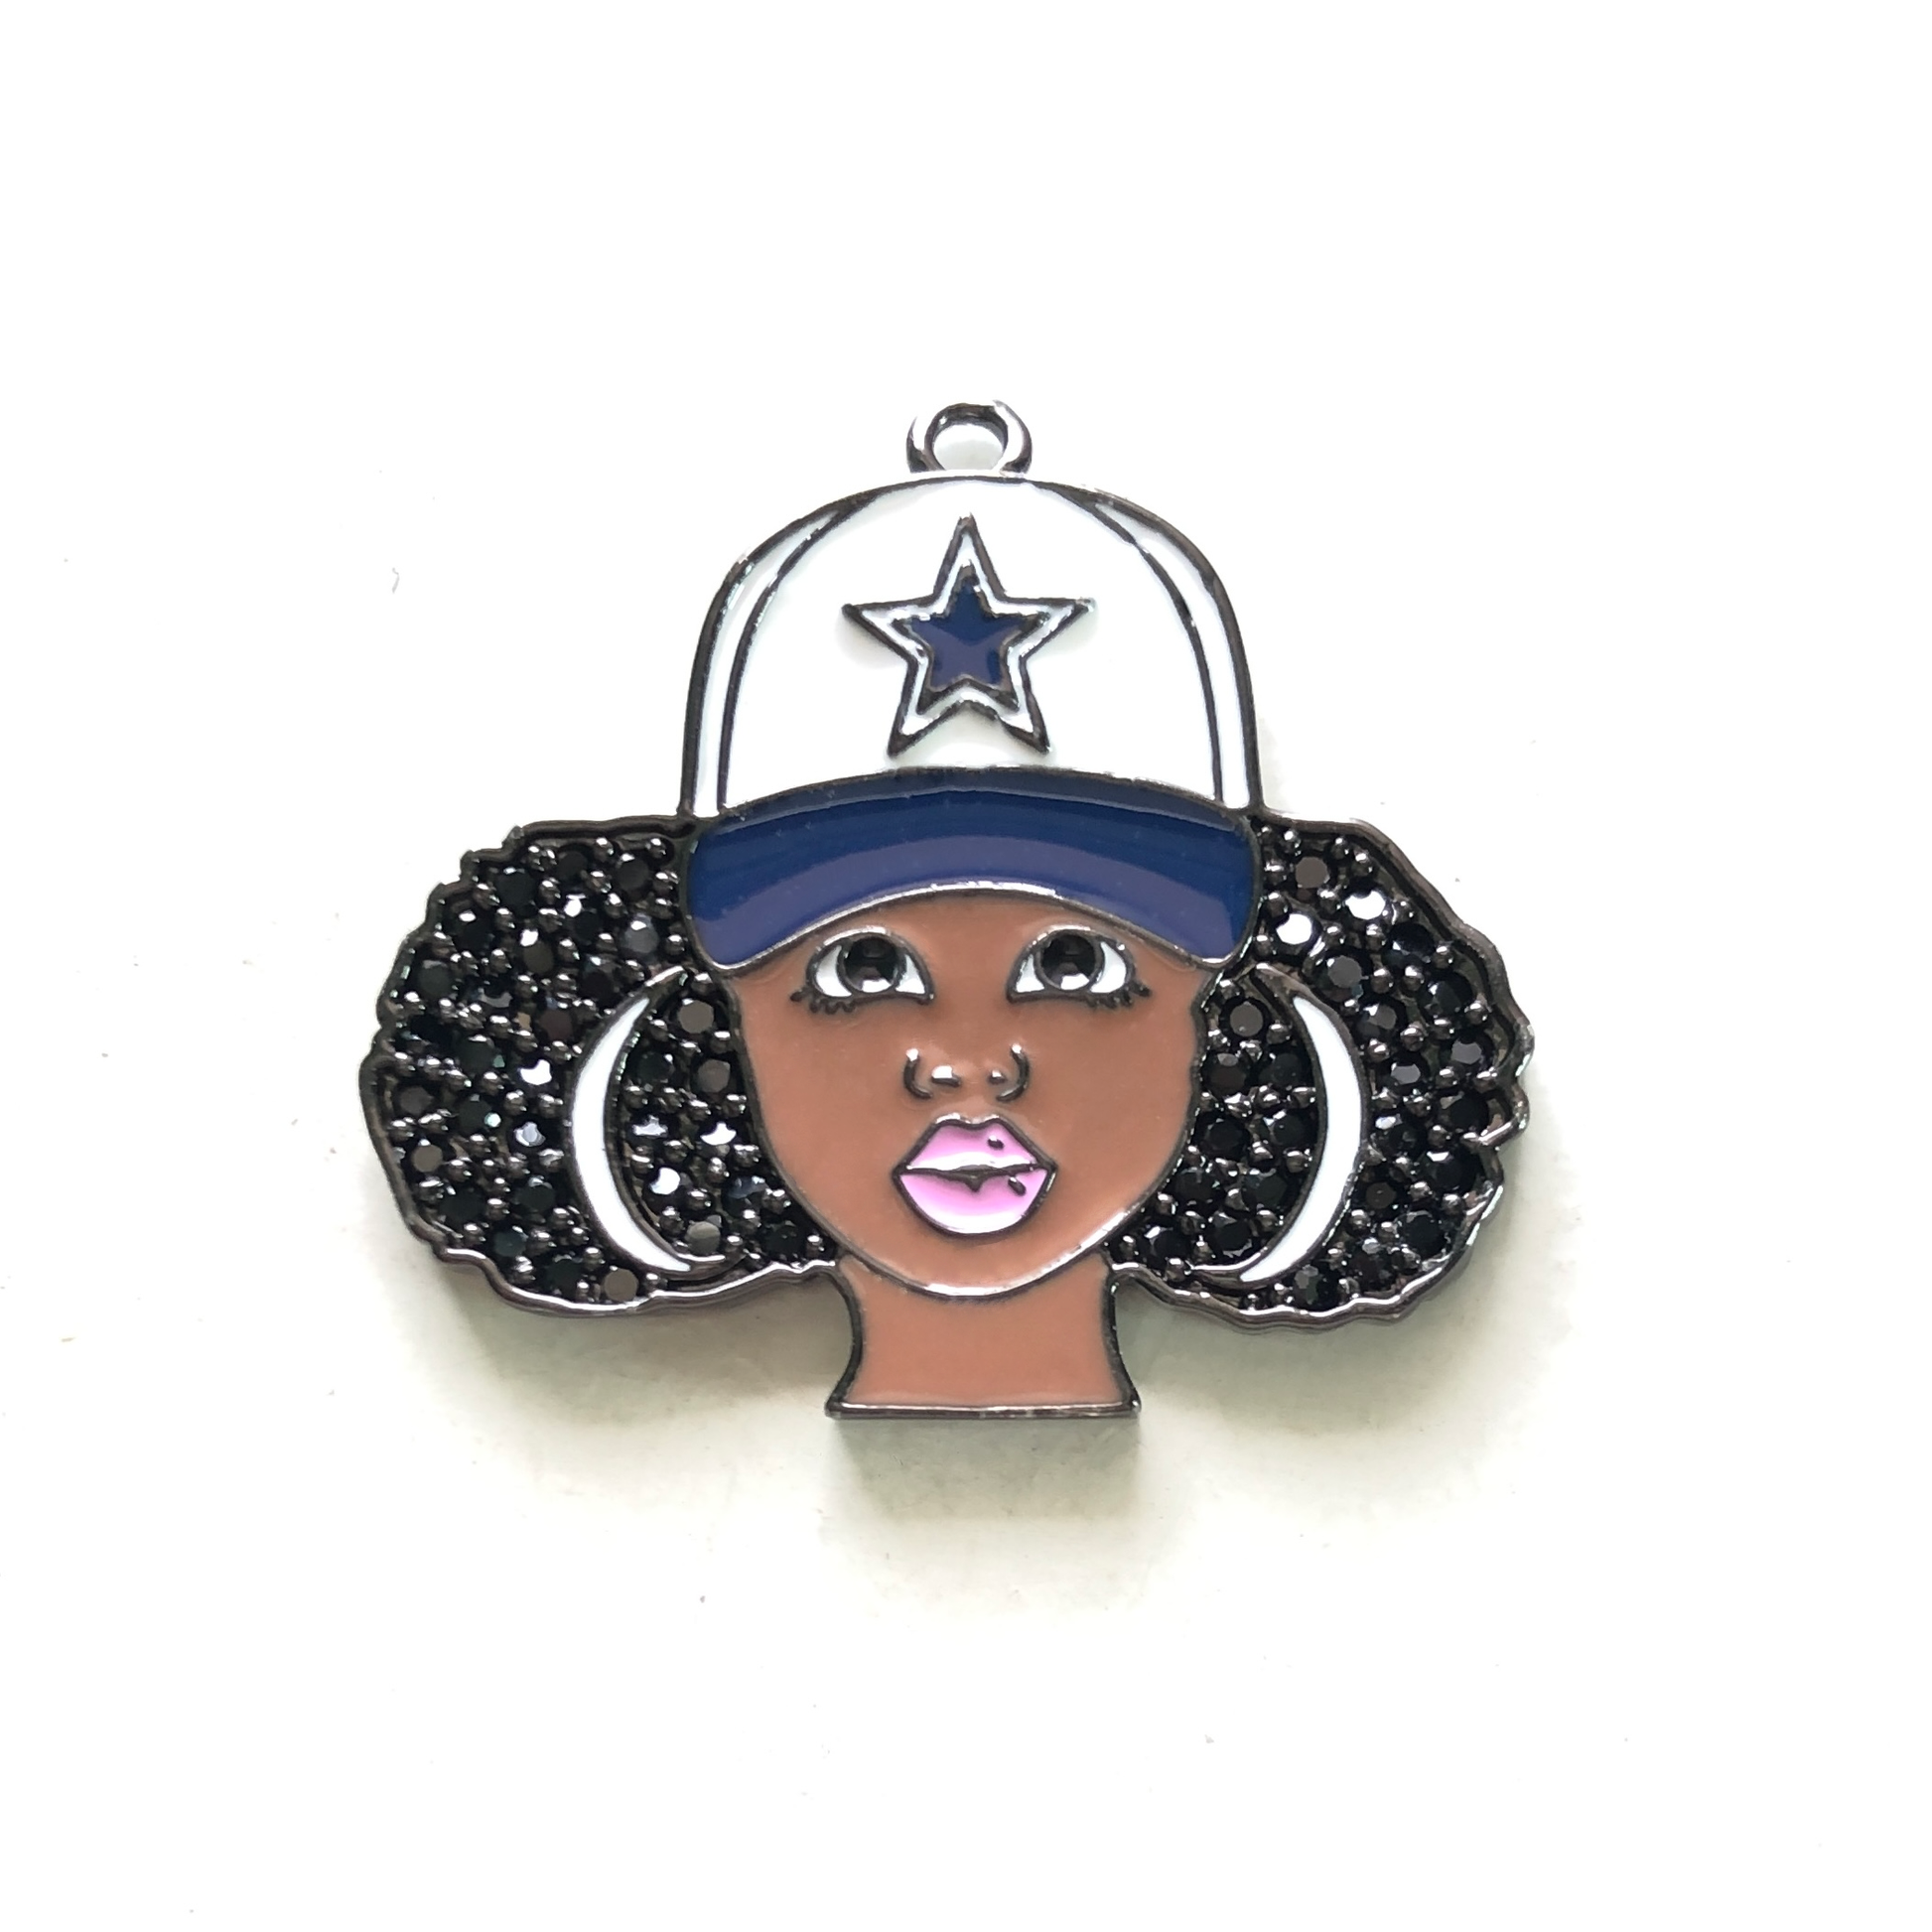 10pcs/lot 32.8*29.5mm CZ Paved Cowboys Black Girl Charms CZ Paved Charms Afro Girl/Queen Charms American Football Sports New Charms Arrivals Charms Beads Beyond